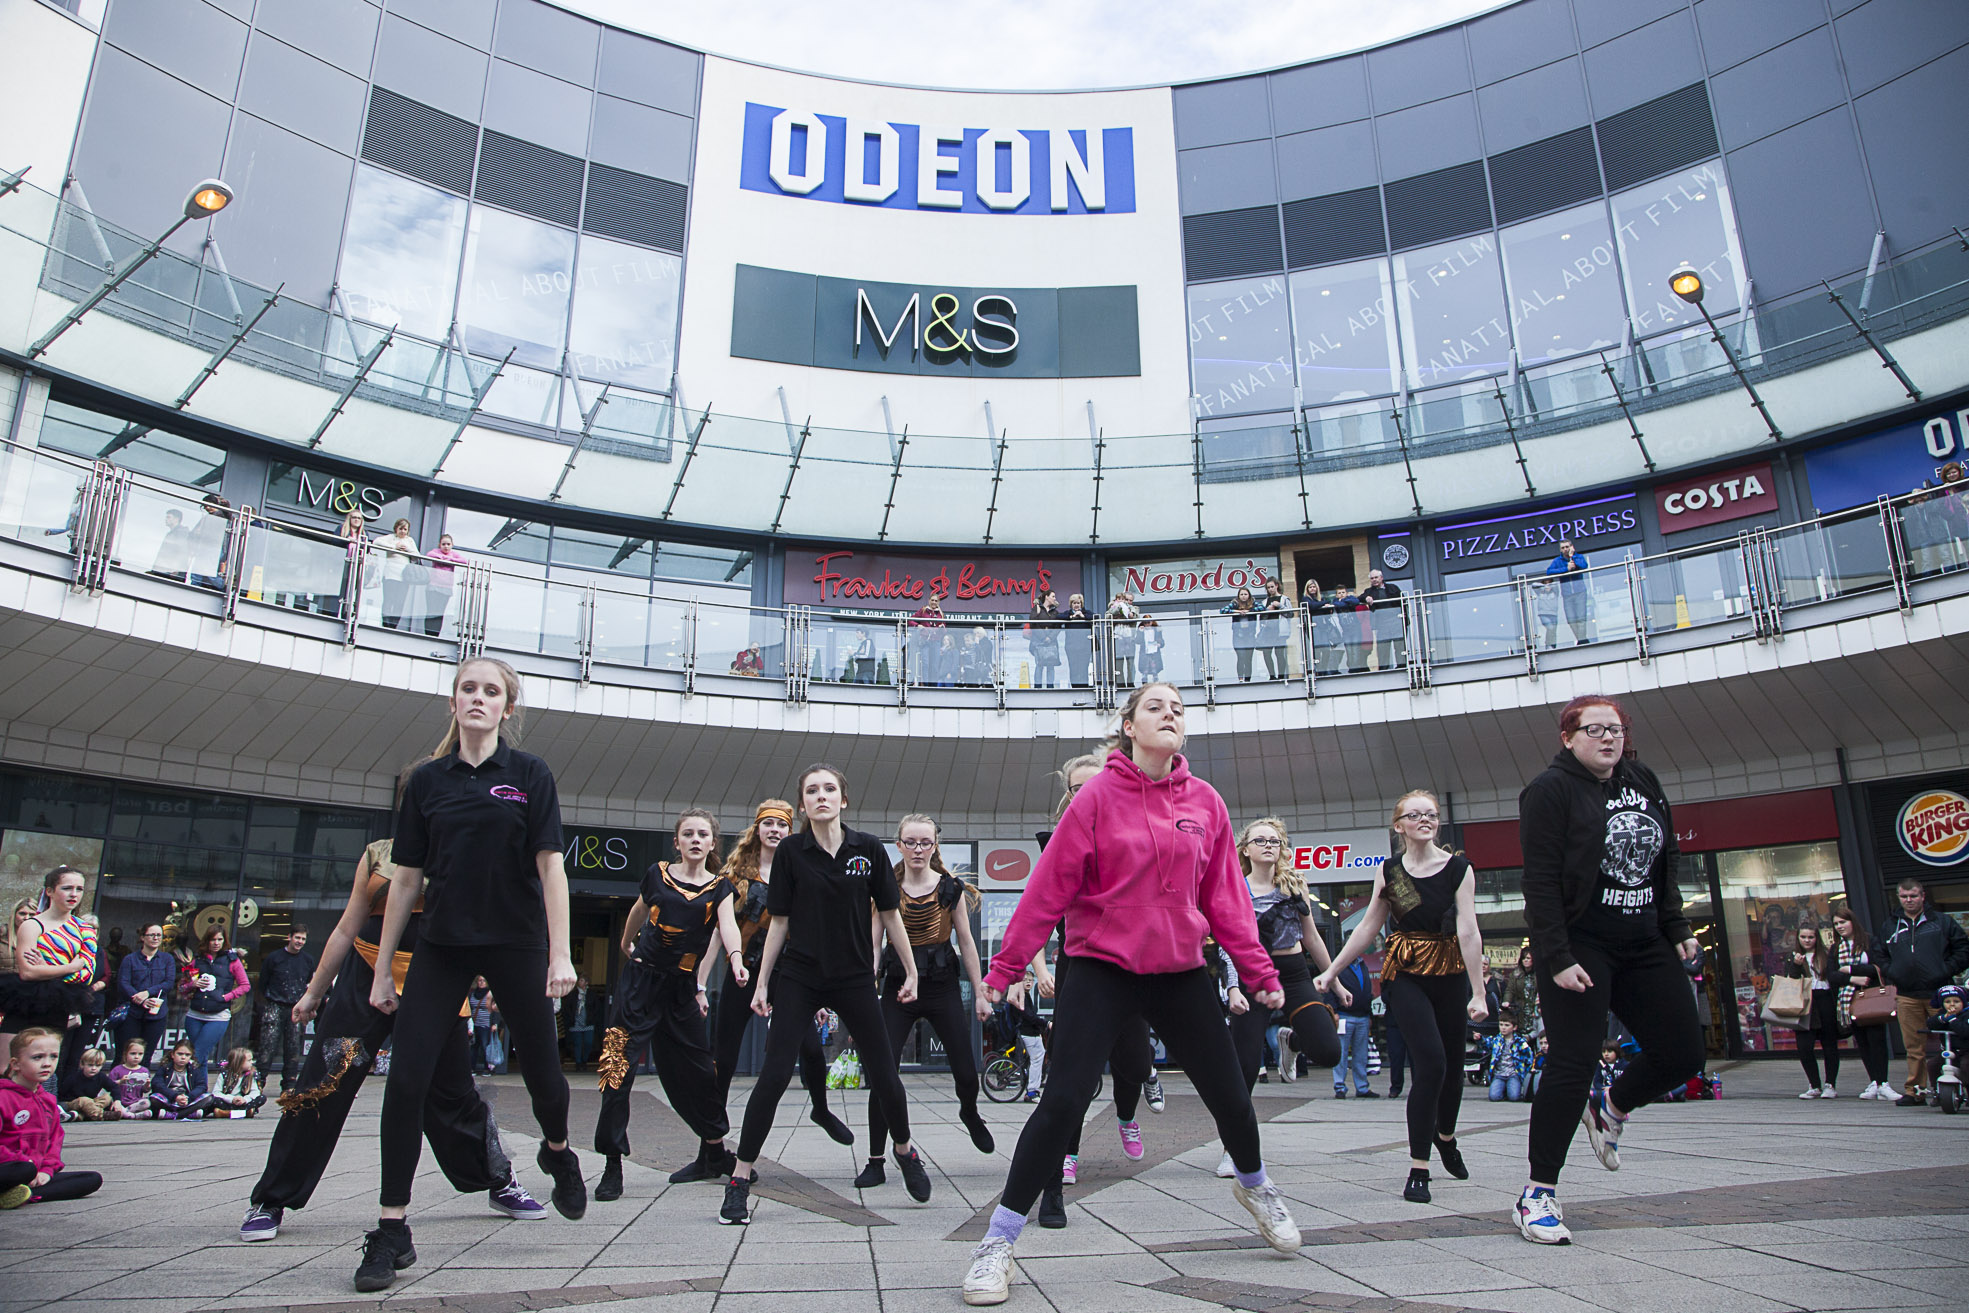 Shoppers enchanted by young dancers at Eagles Meadow